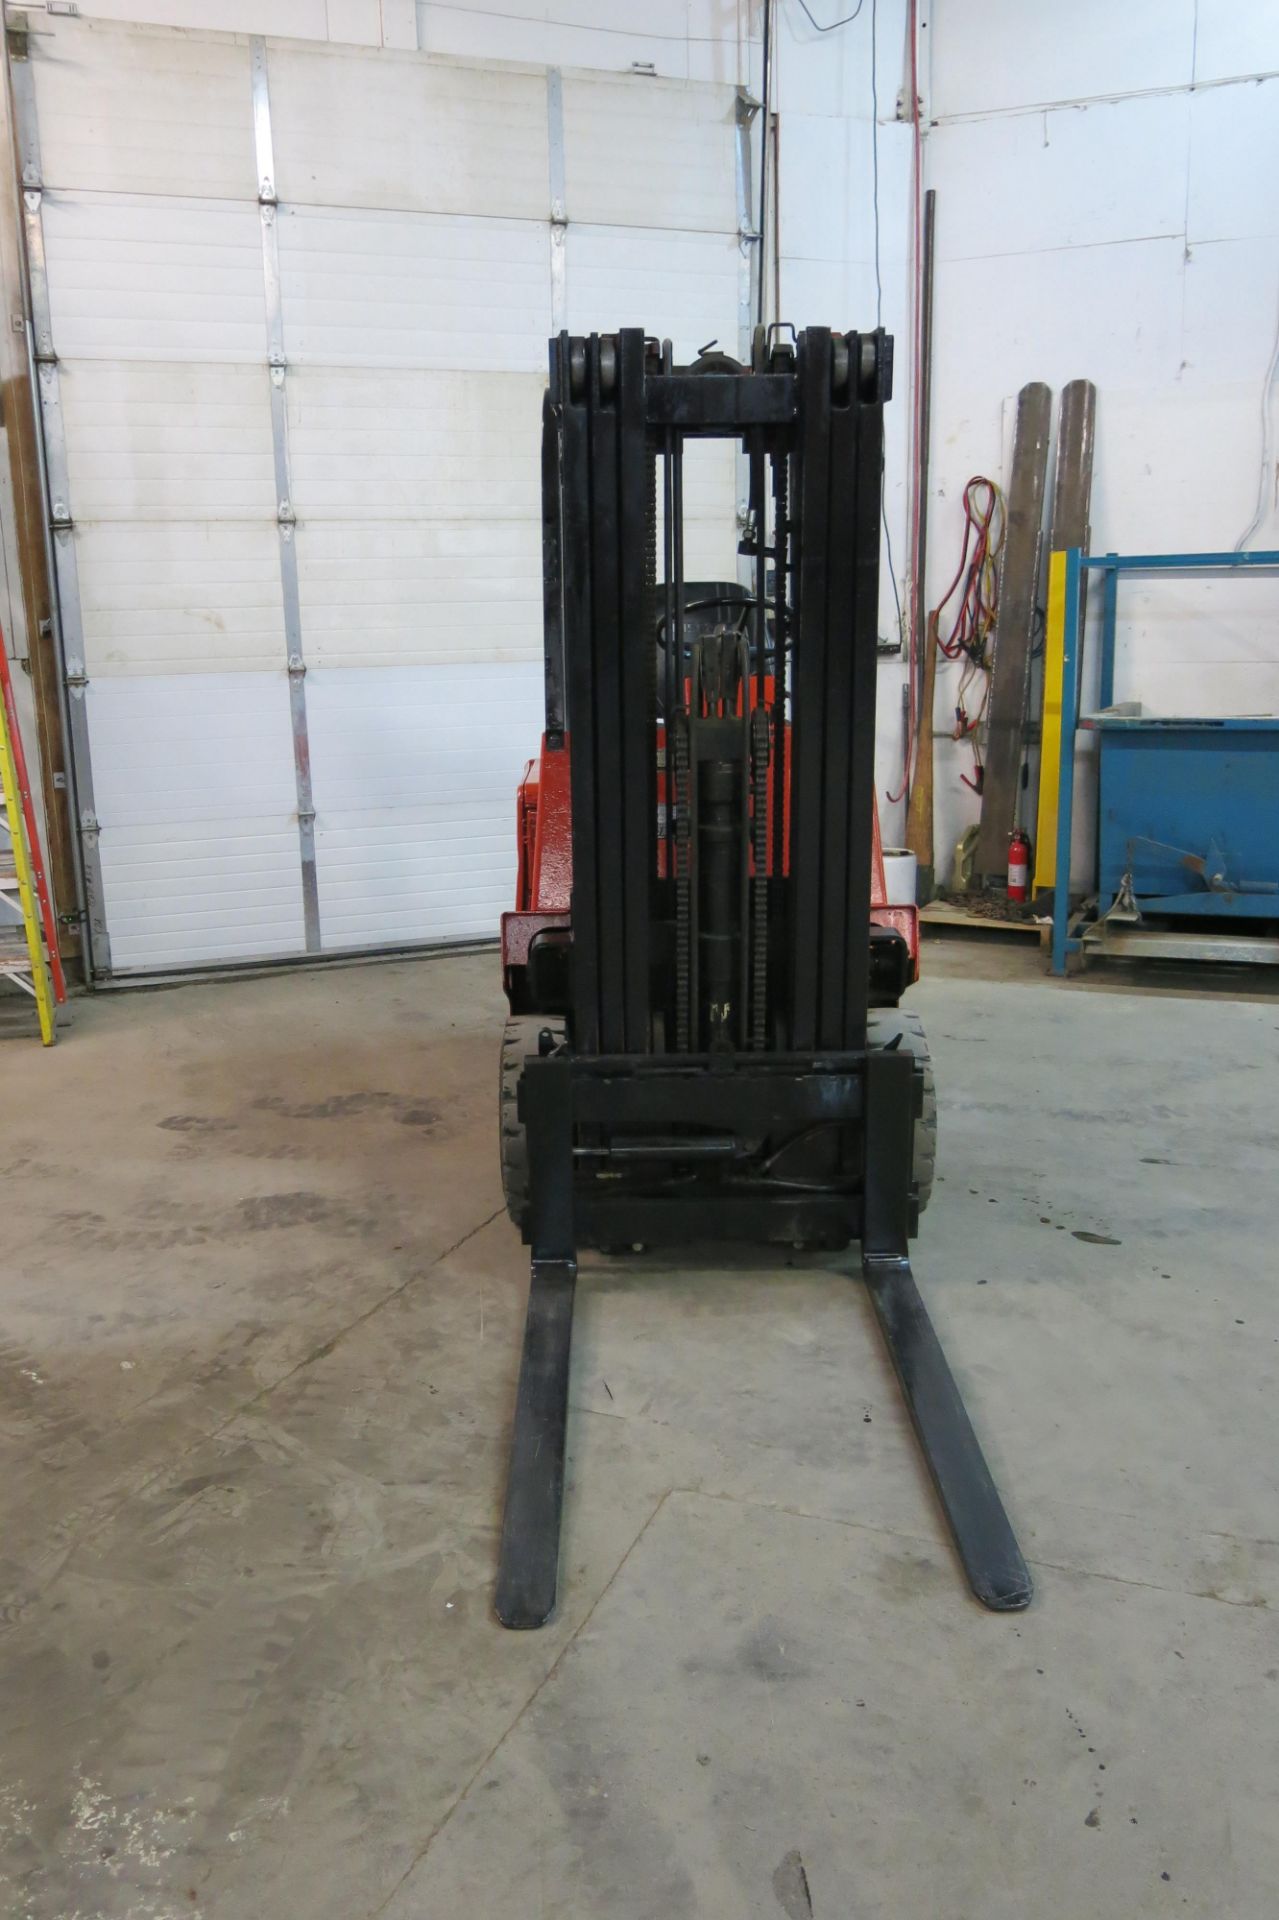 NISSAN, CYB02L20S, 4,000 LBS, 3 STAGE, ELECTRIC FORKLIFT, CHARGER, 6,304 HOURS, S/N CY802-002260 - Image 3 of 14